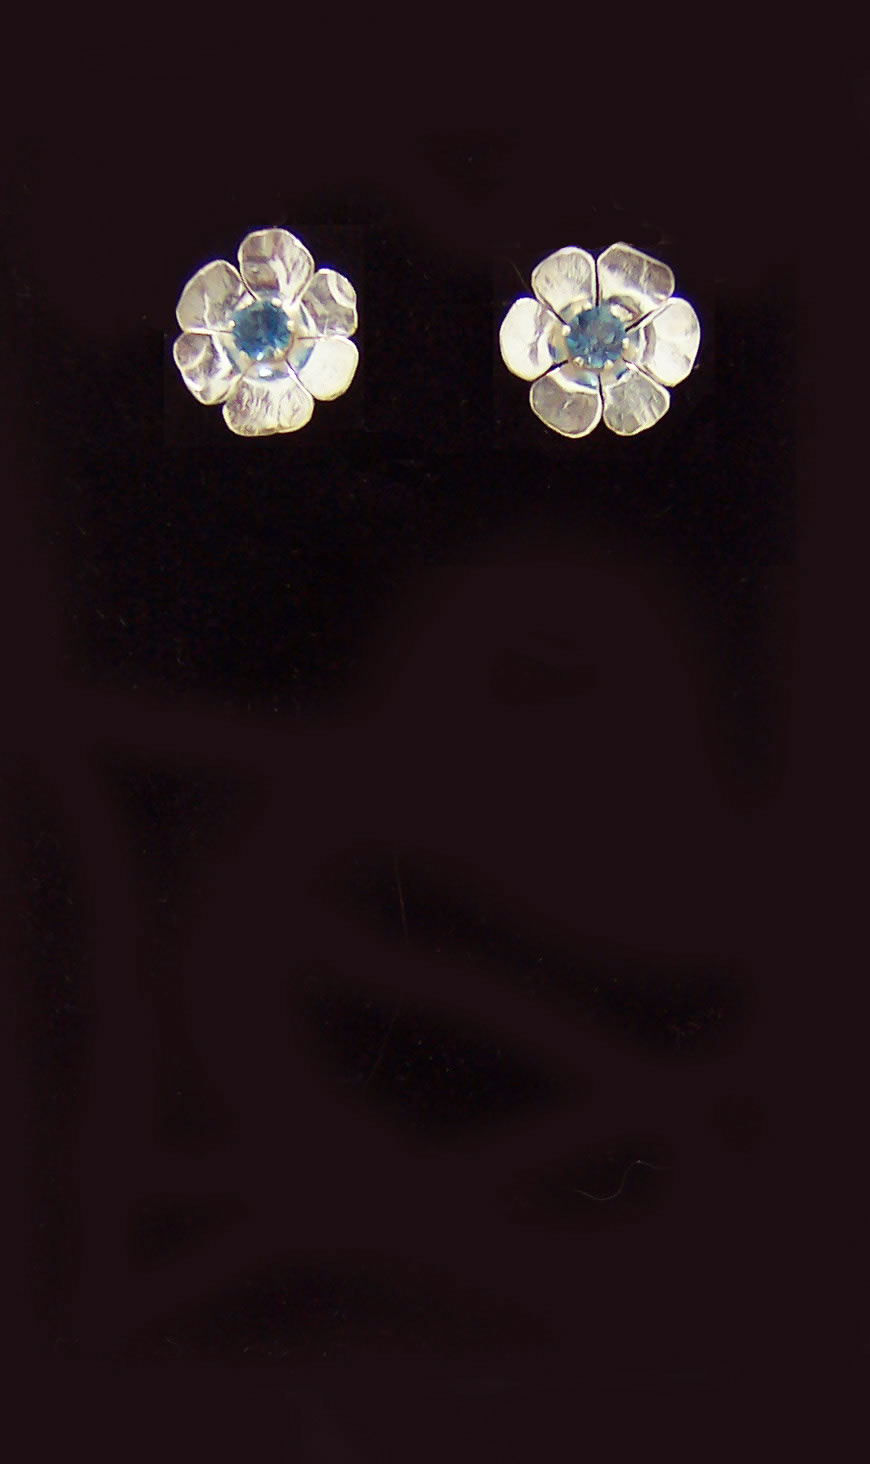 Silver and Topaz Stud Earrings